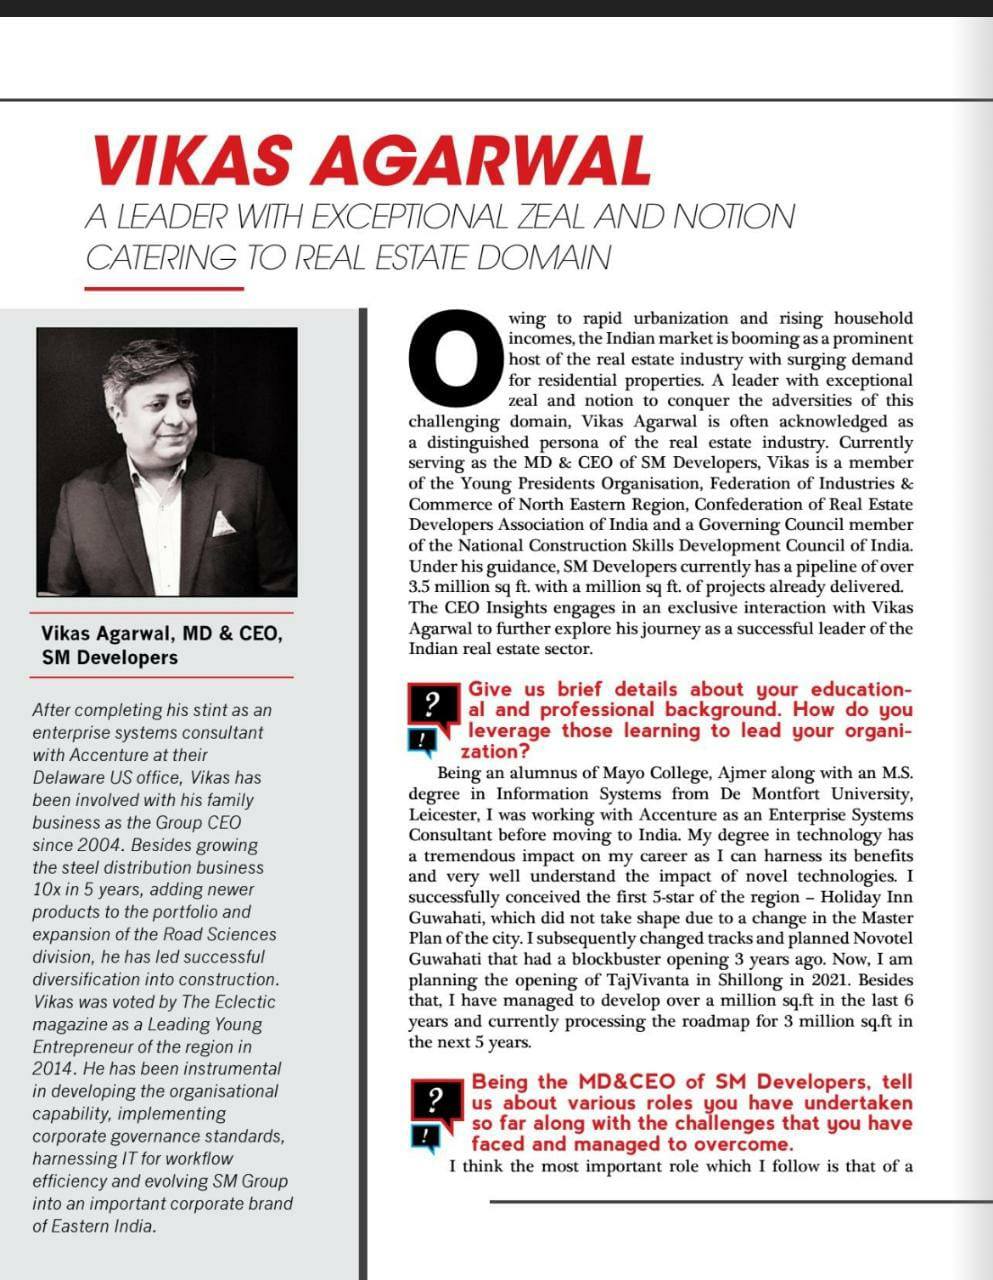 Top 10 Leaders in Real Estate 2020 in 'CEO Insights' magazine is Mr. Vikas Agarwal, Group CEO, SM Group and MD & CEO, SM Developers